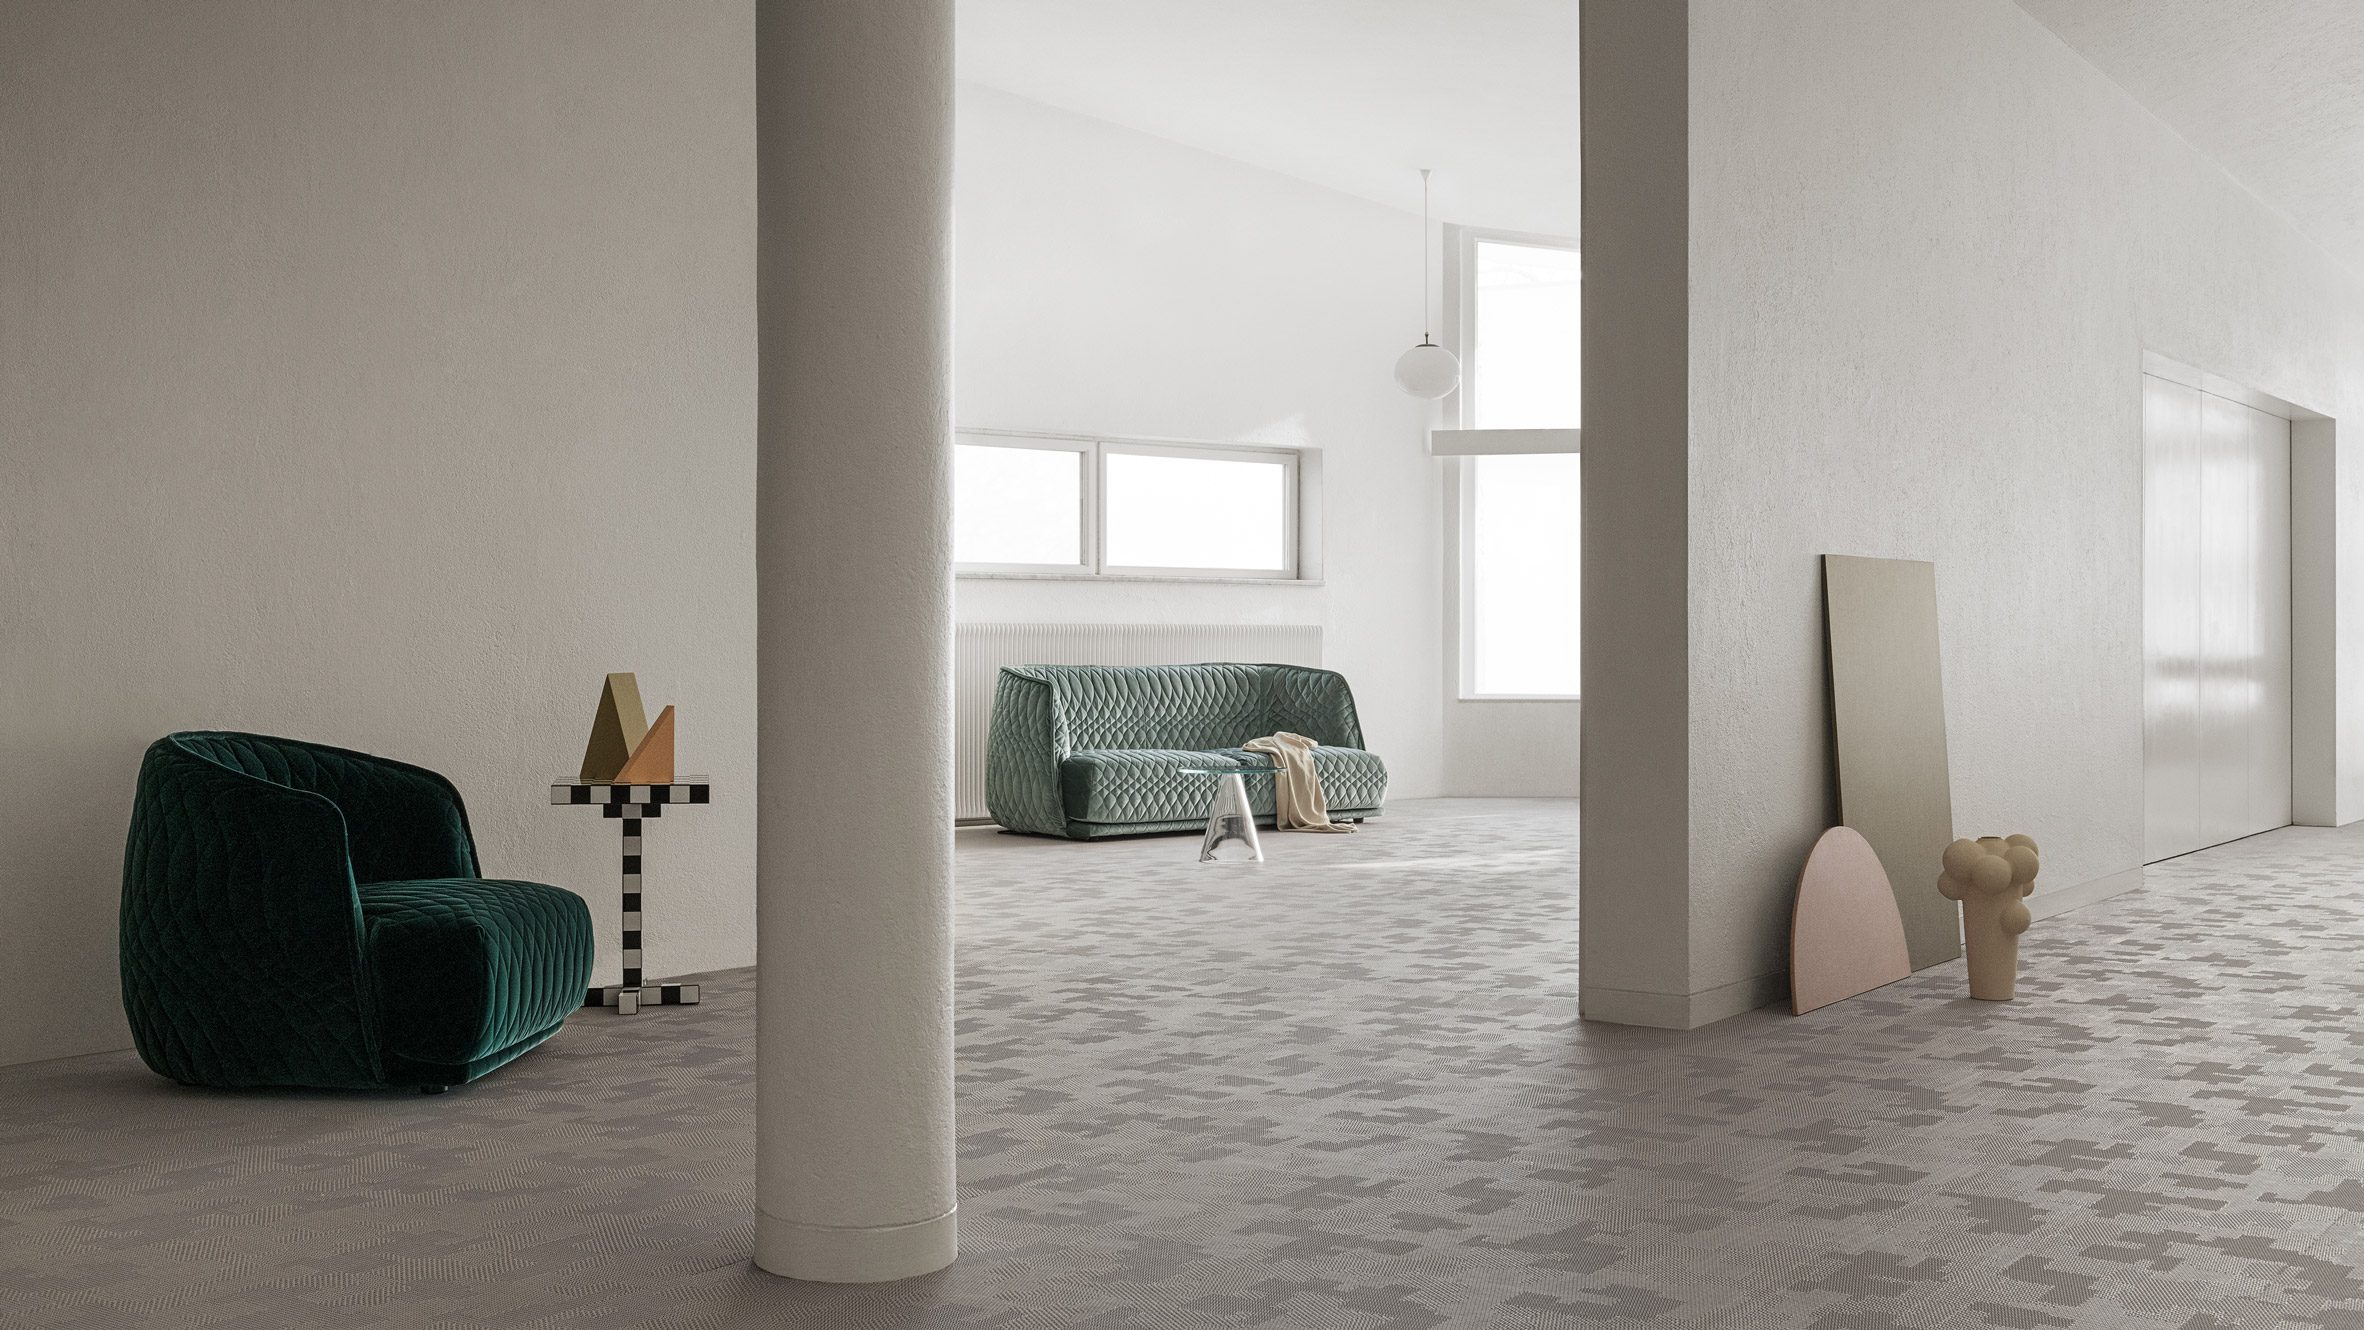 Discover the New DESSO Carpet Tile Collection by Patricia Urquiola